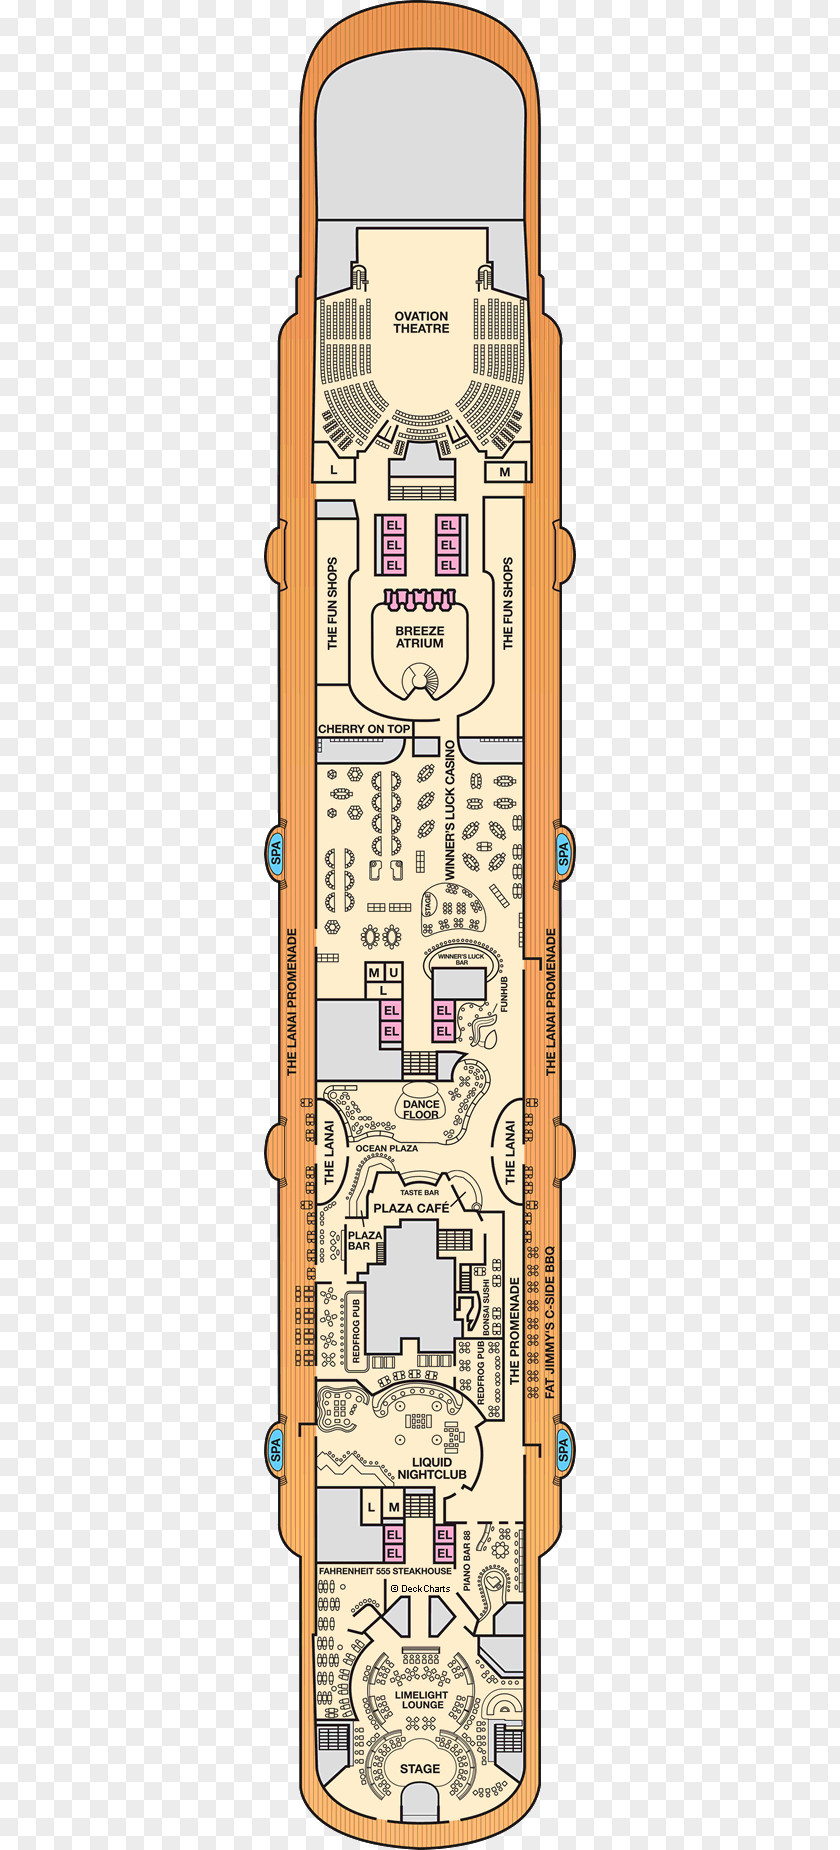 Carnival Breeze Cruise Ship Layout Line Dream Deck PNG